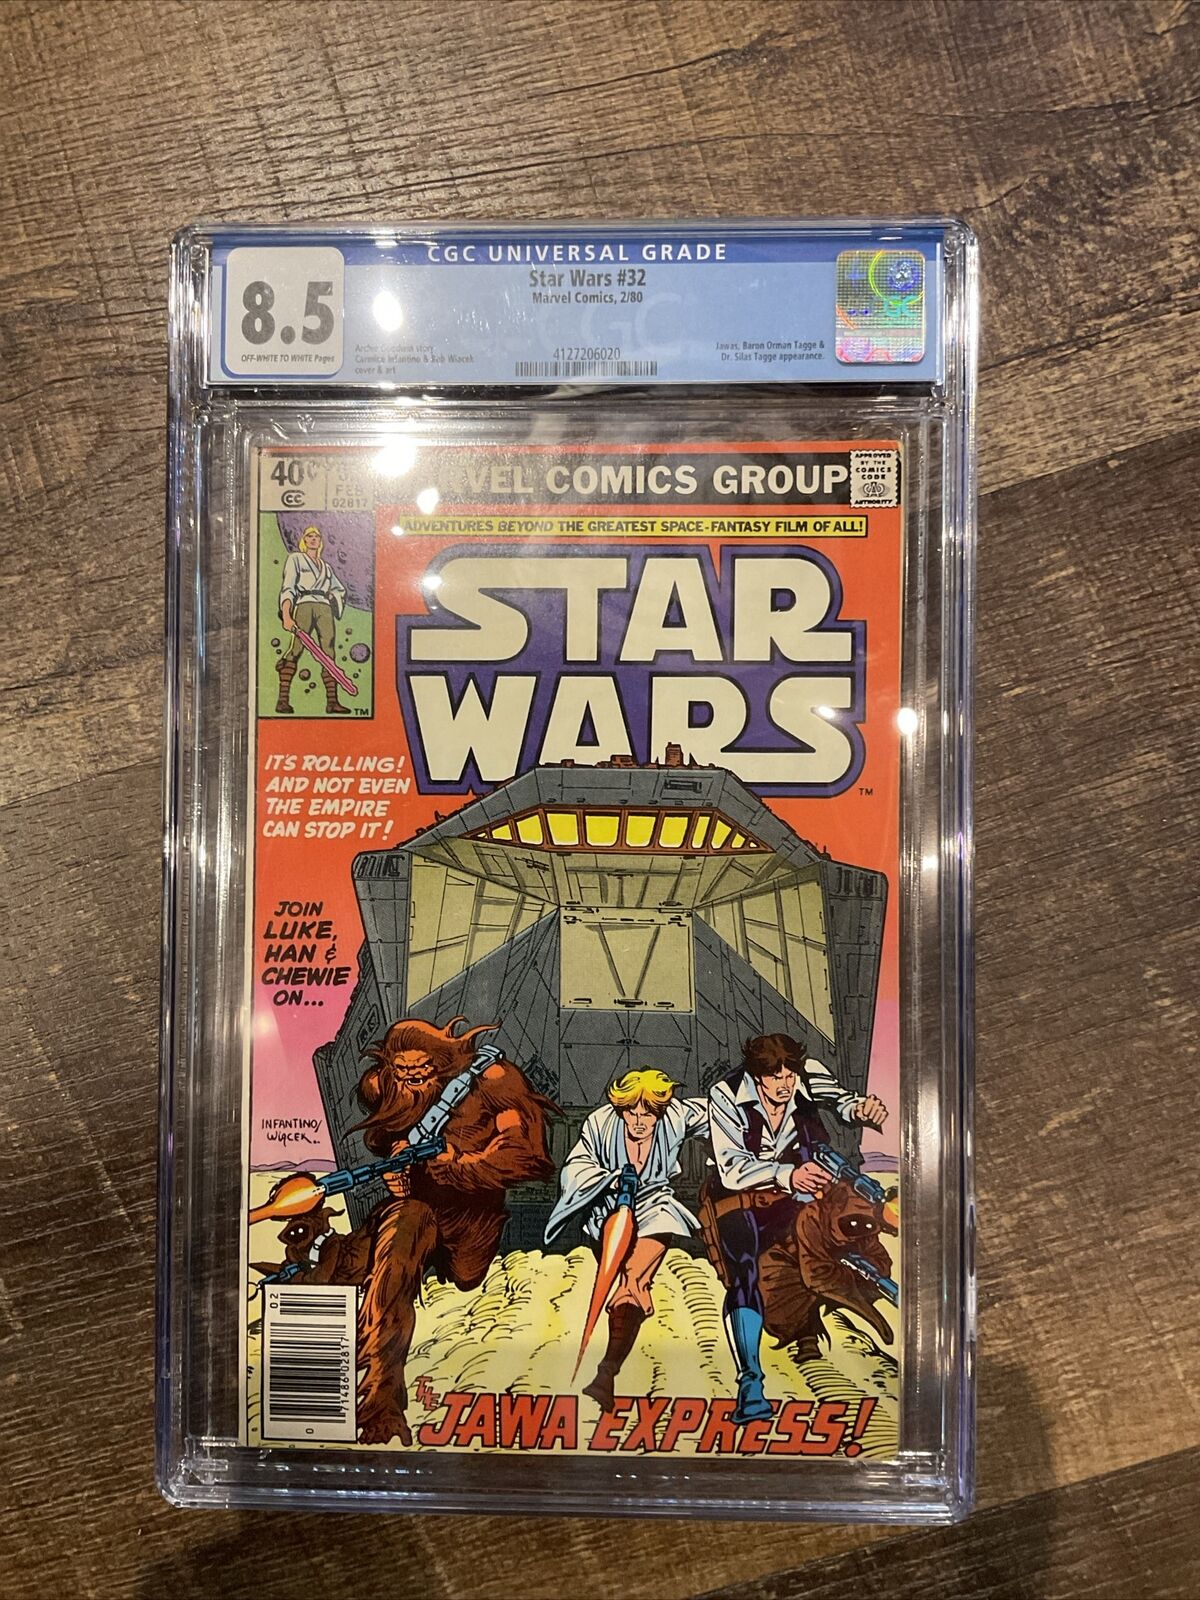 Star Wars #32 CGC Graded 8.5 Marvel 1980 OFF-White To White Pages Comic Book.